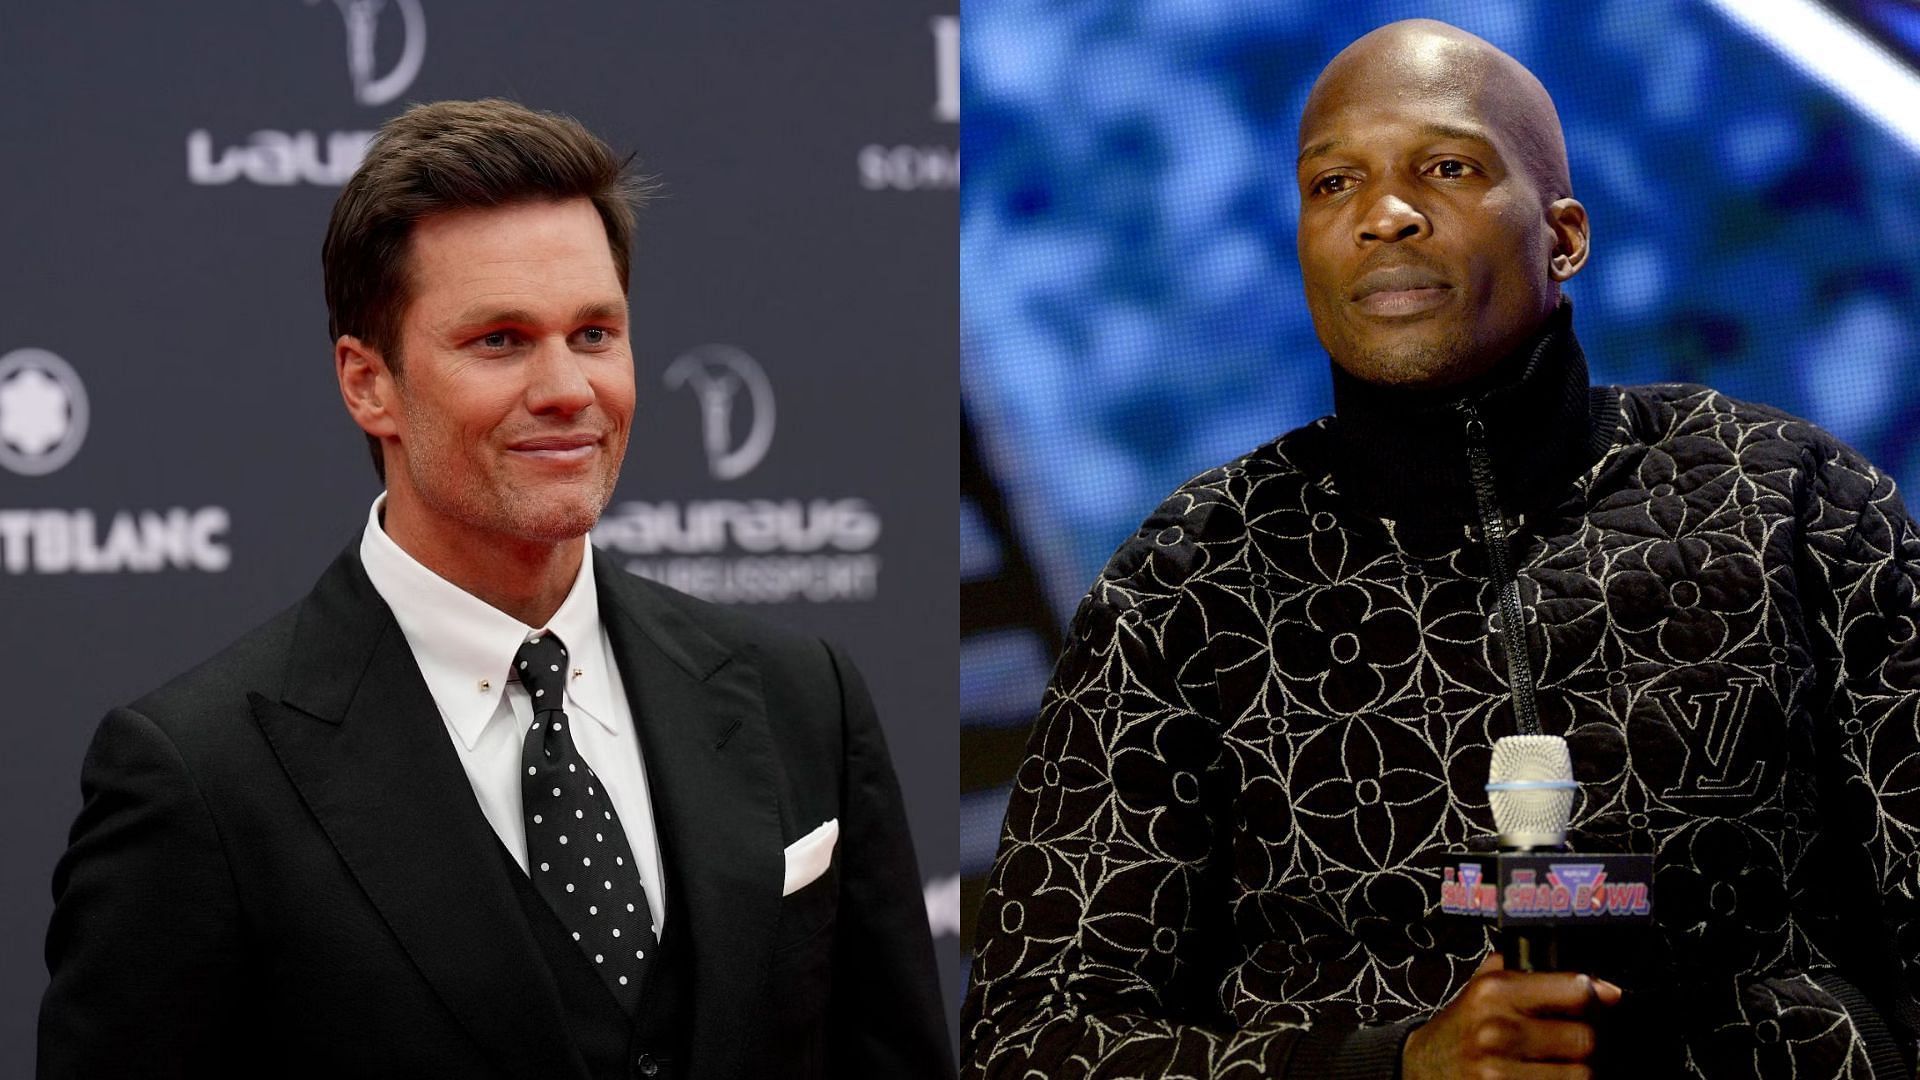 Chad Johnson predicts Tom Brady's latest venture to disappoint fans ...